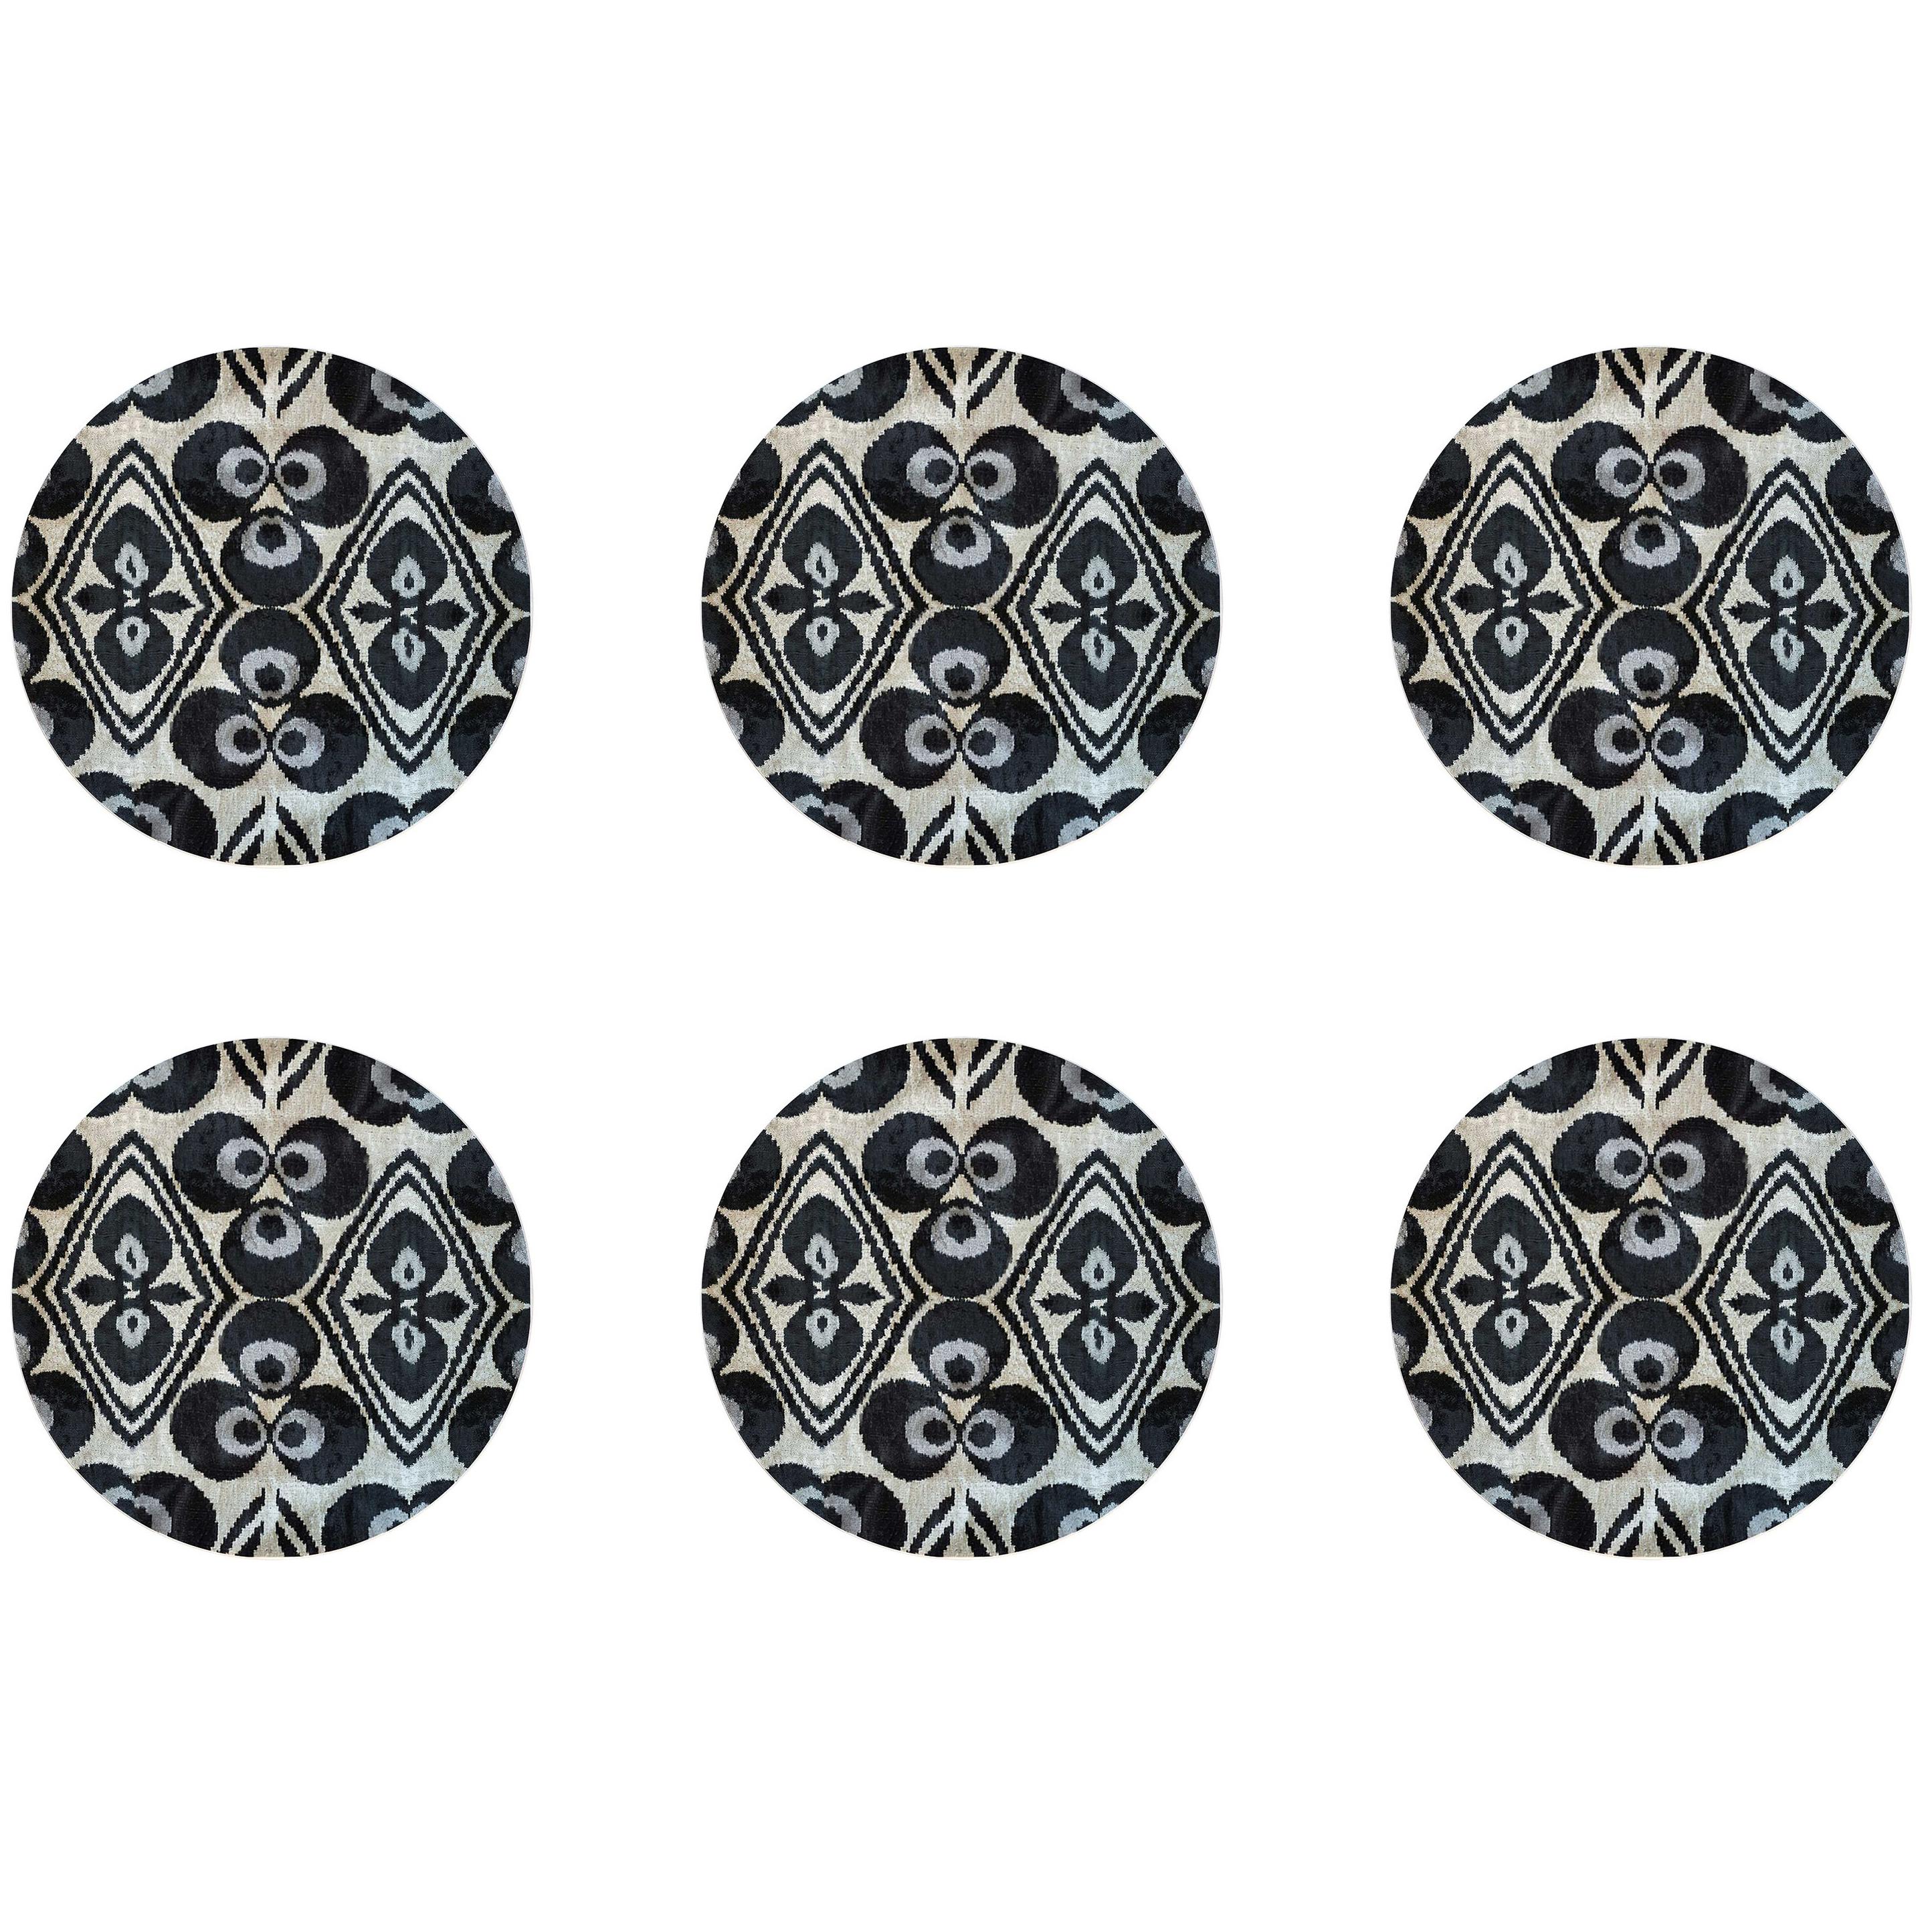 Ikat Porcelain Dinner Plates Set of Six Black Made in Italy